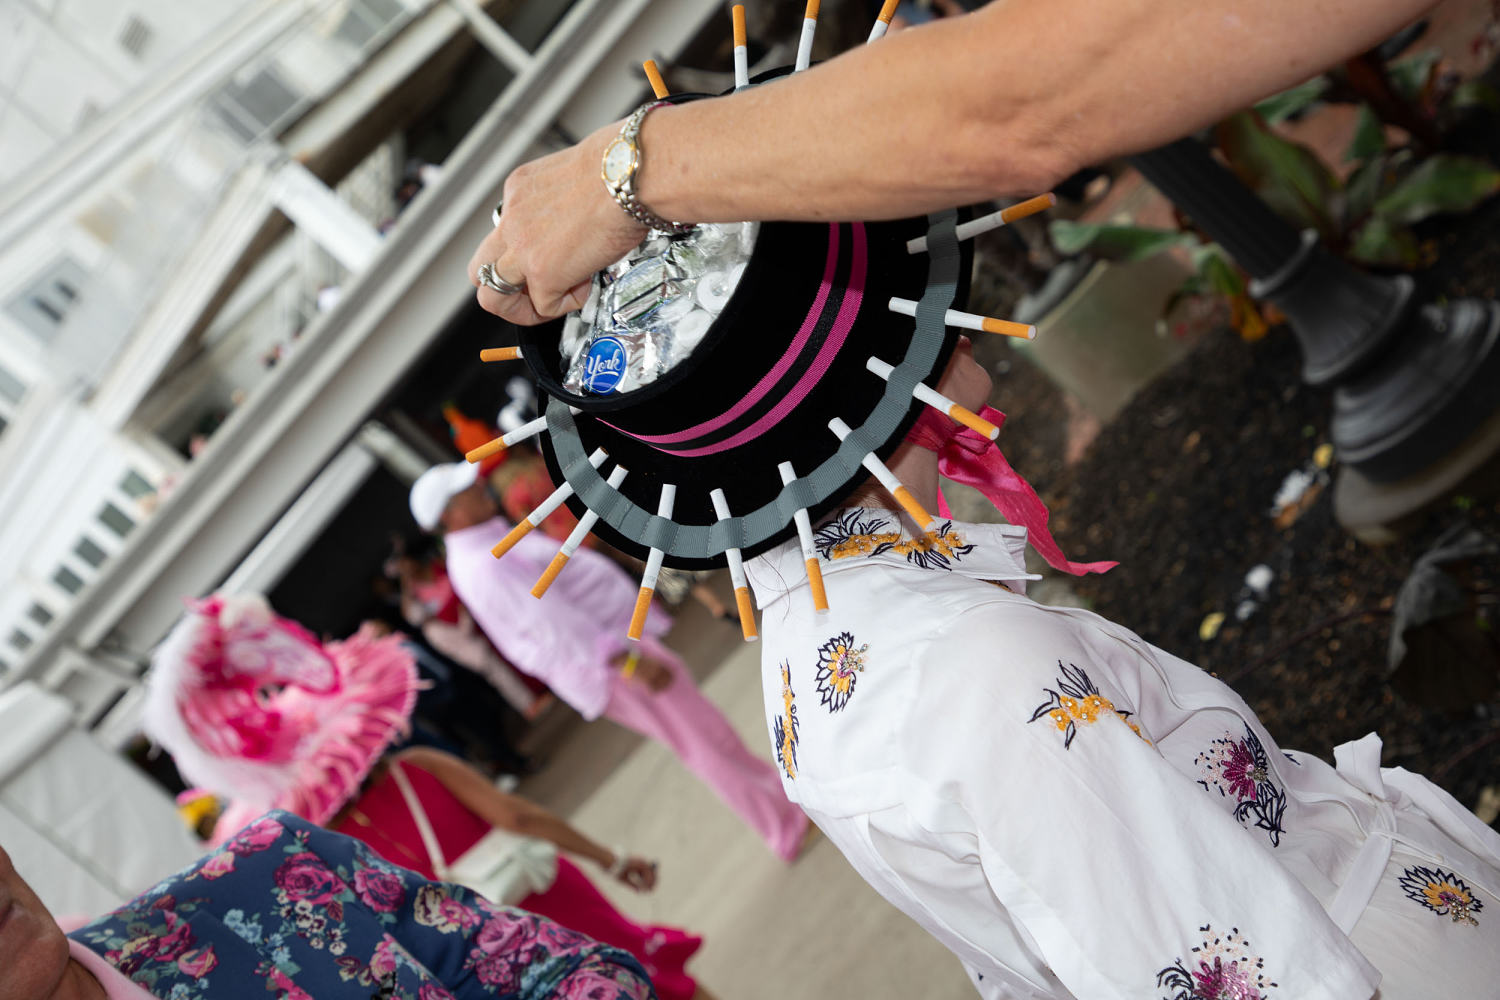 photos of the grit and glam of the 150th kentucky derby